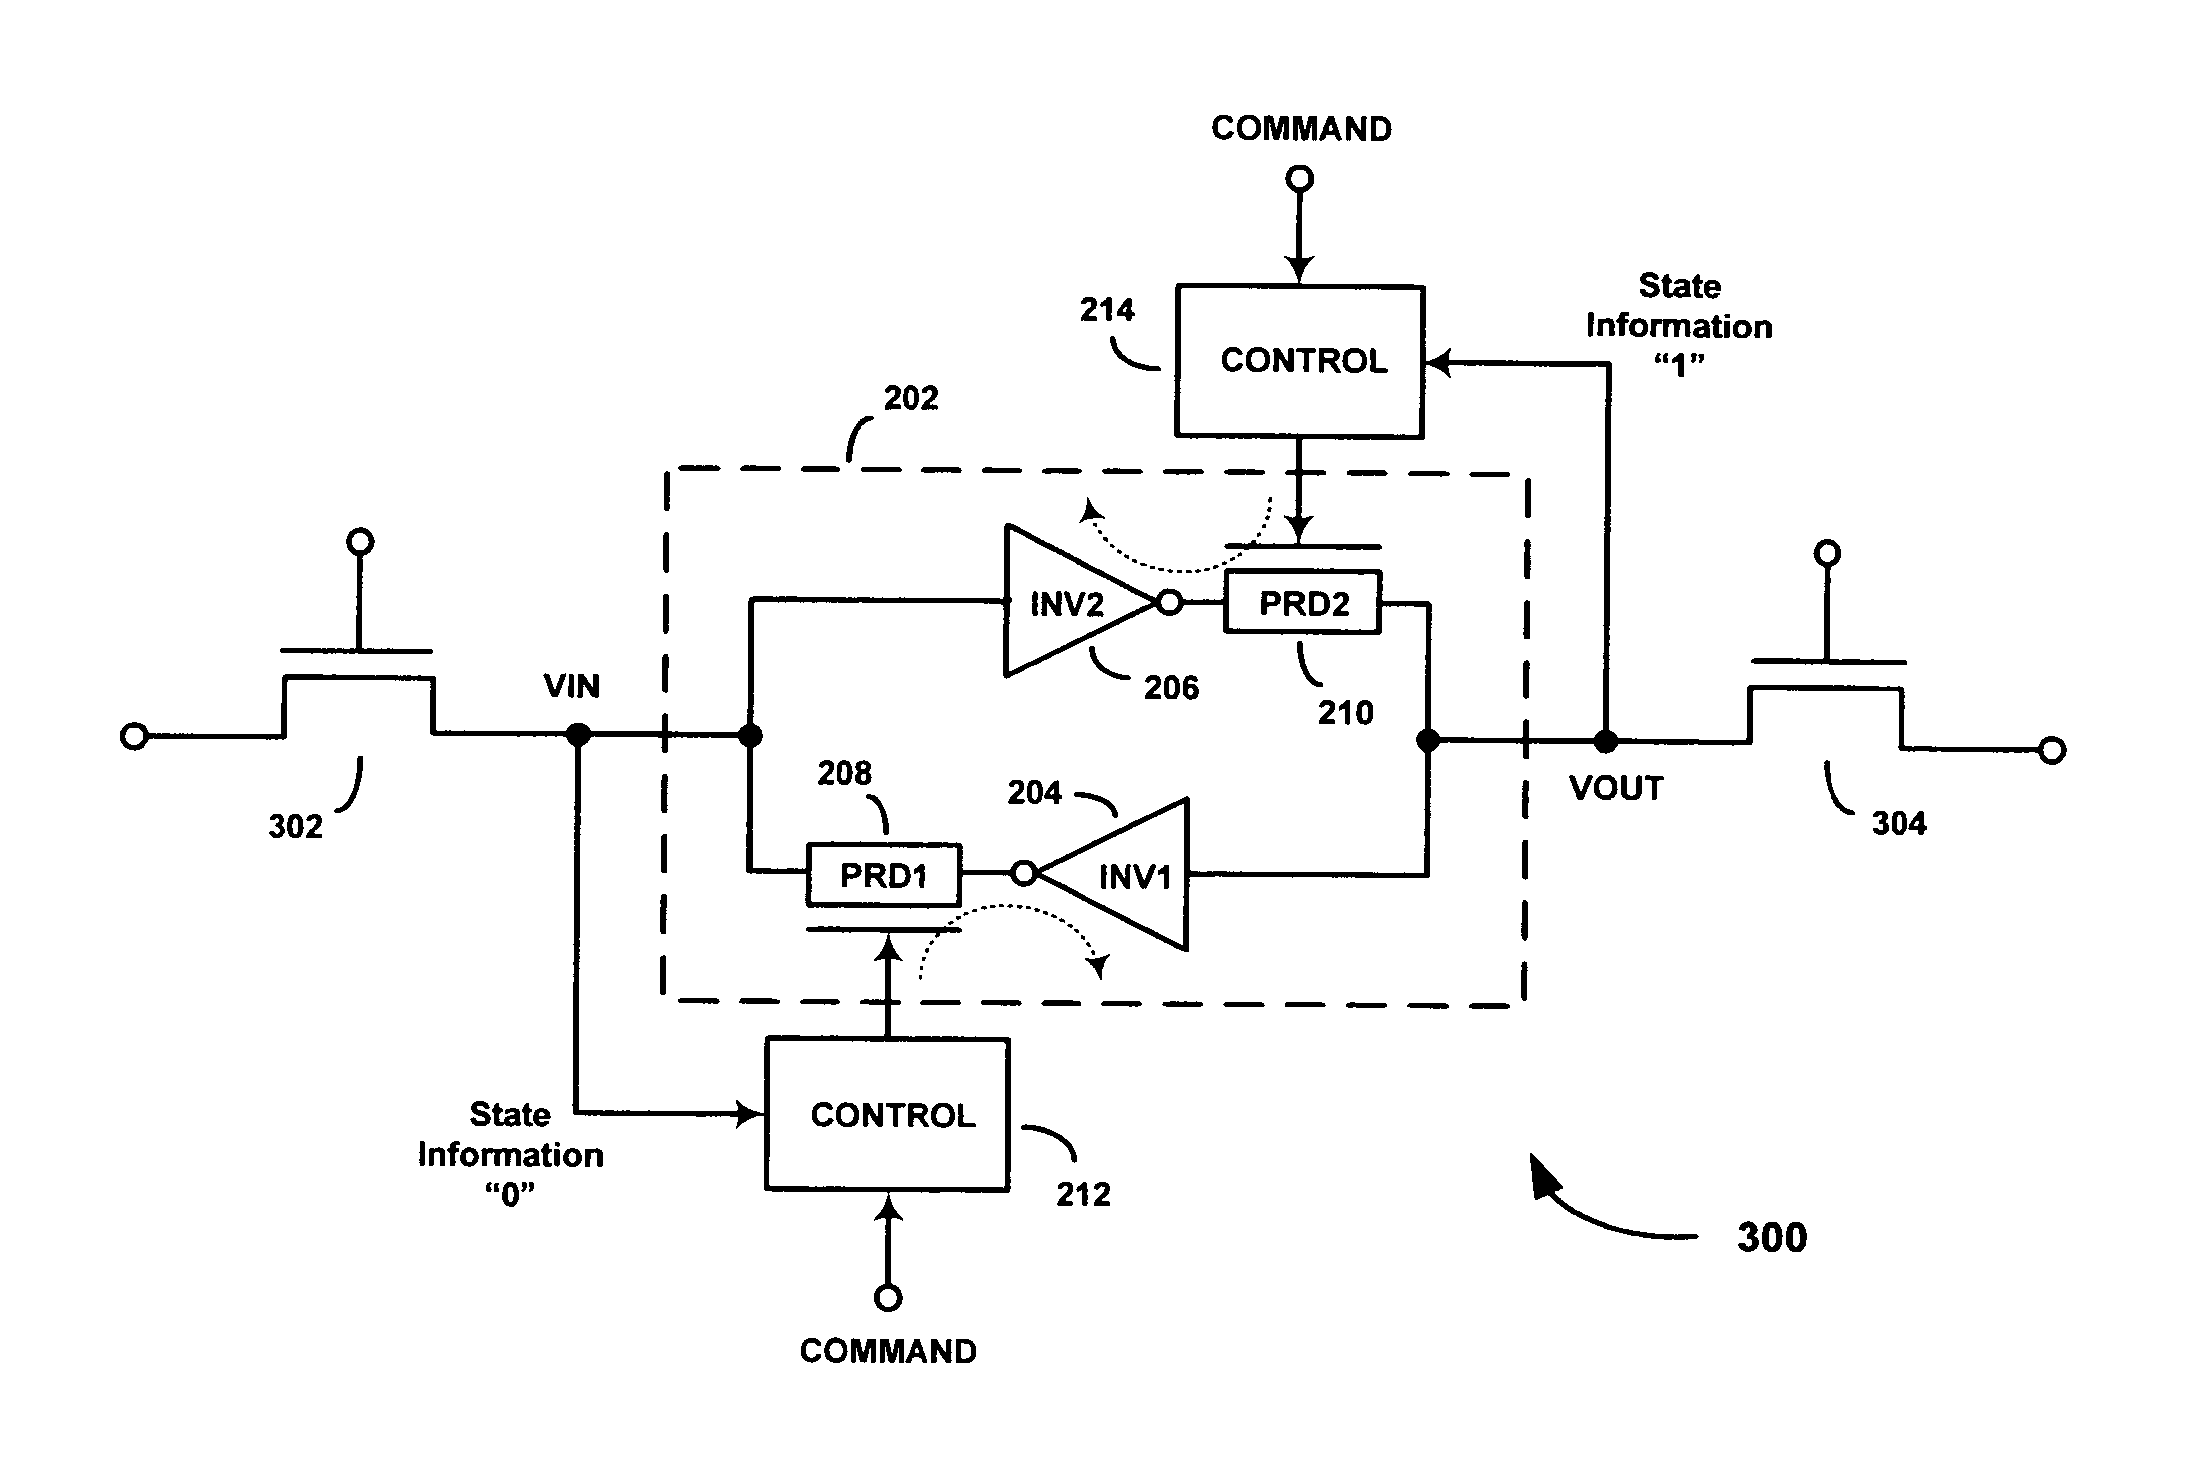 SEU hardened latches and memory cells using progrmmable resistance devices